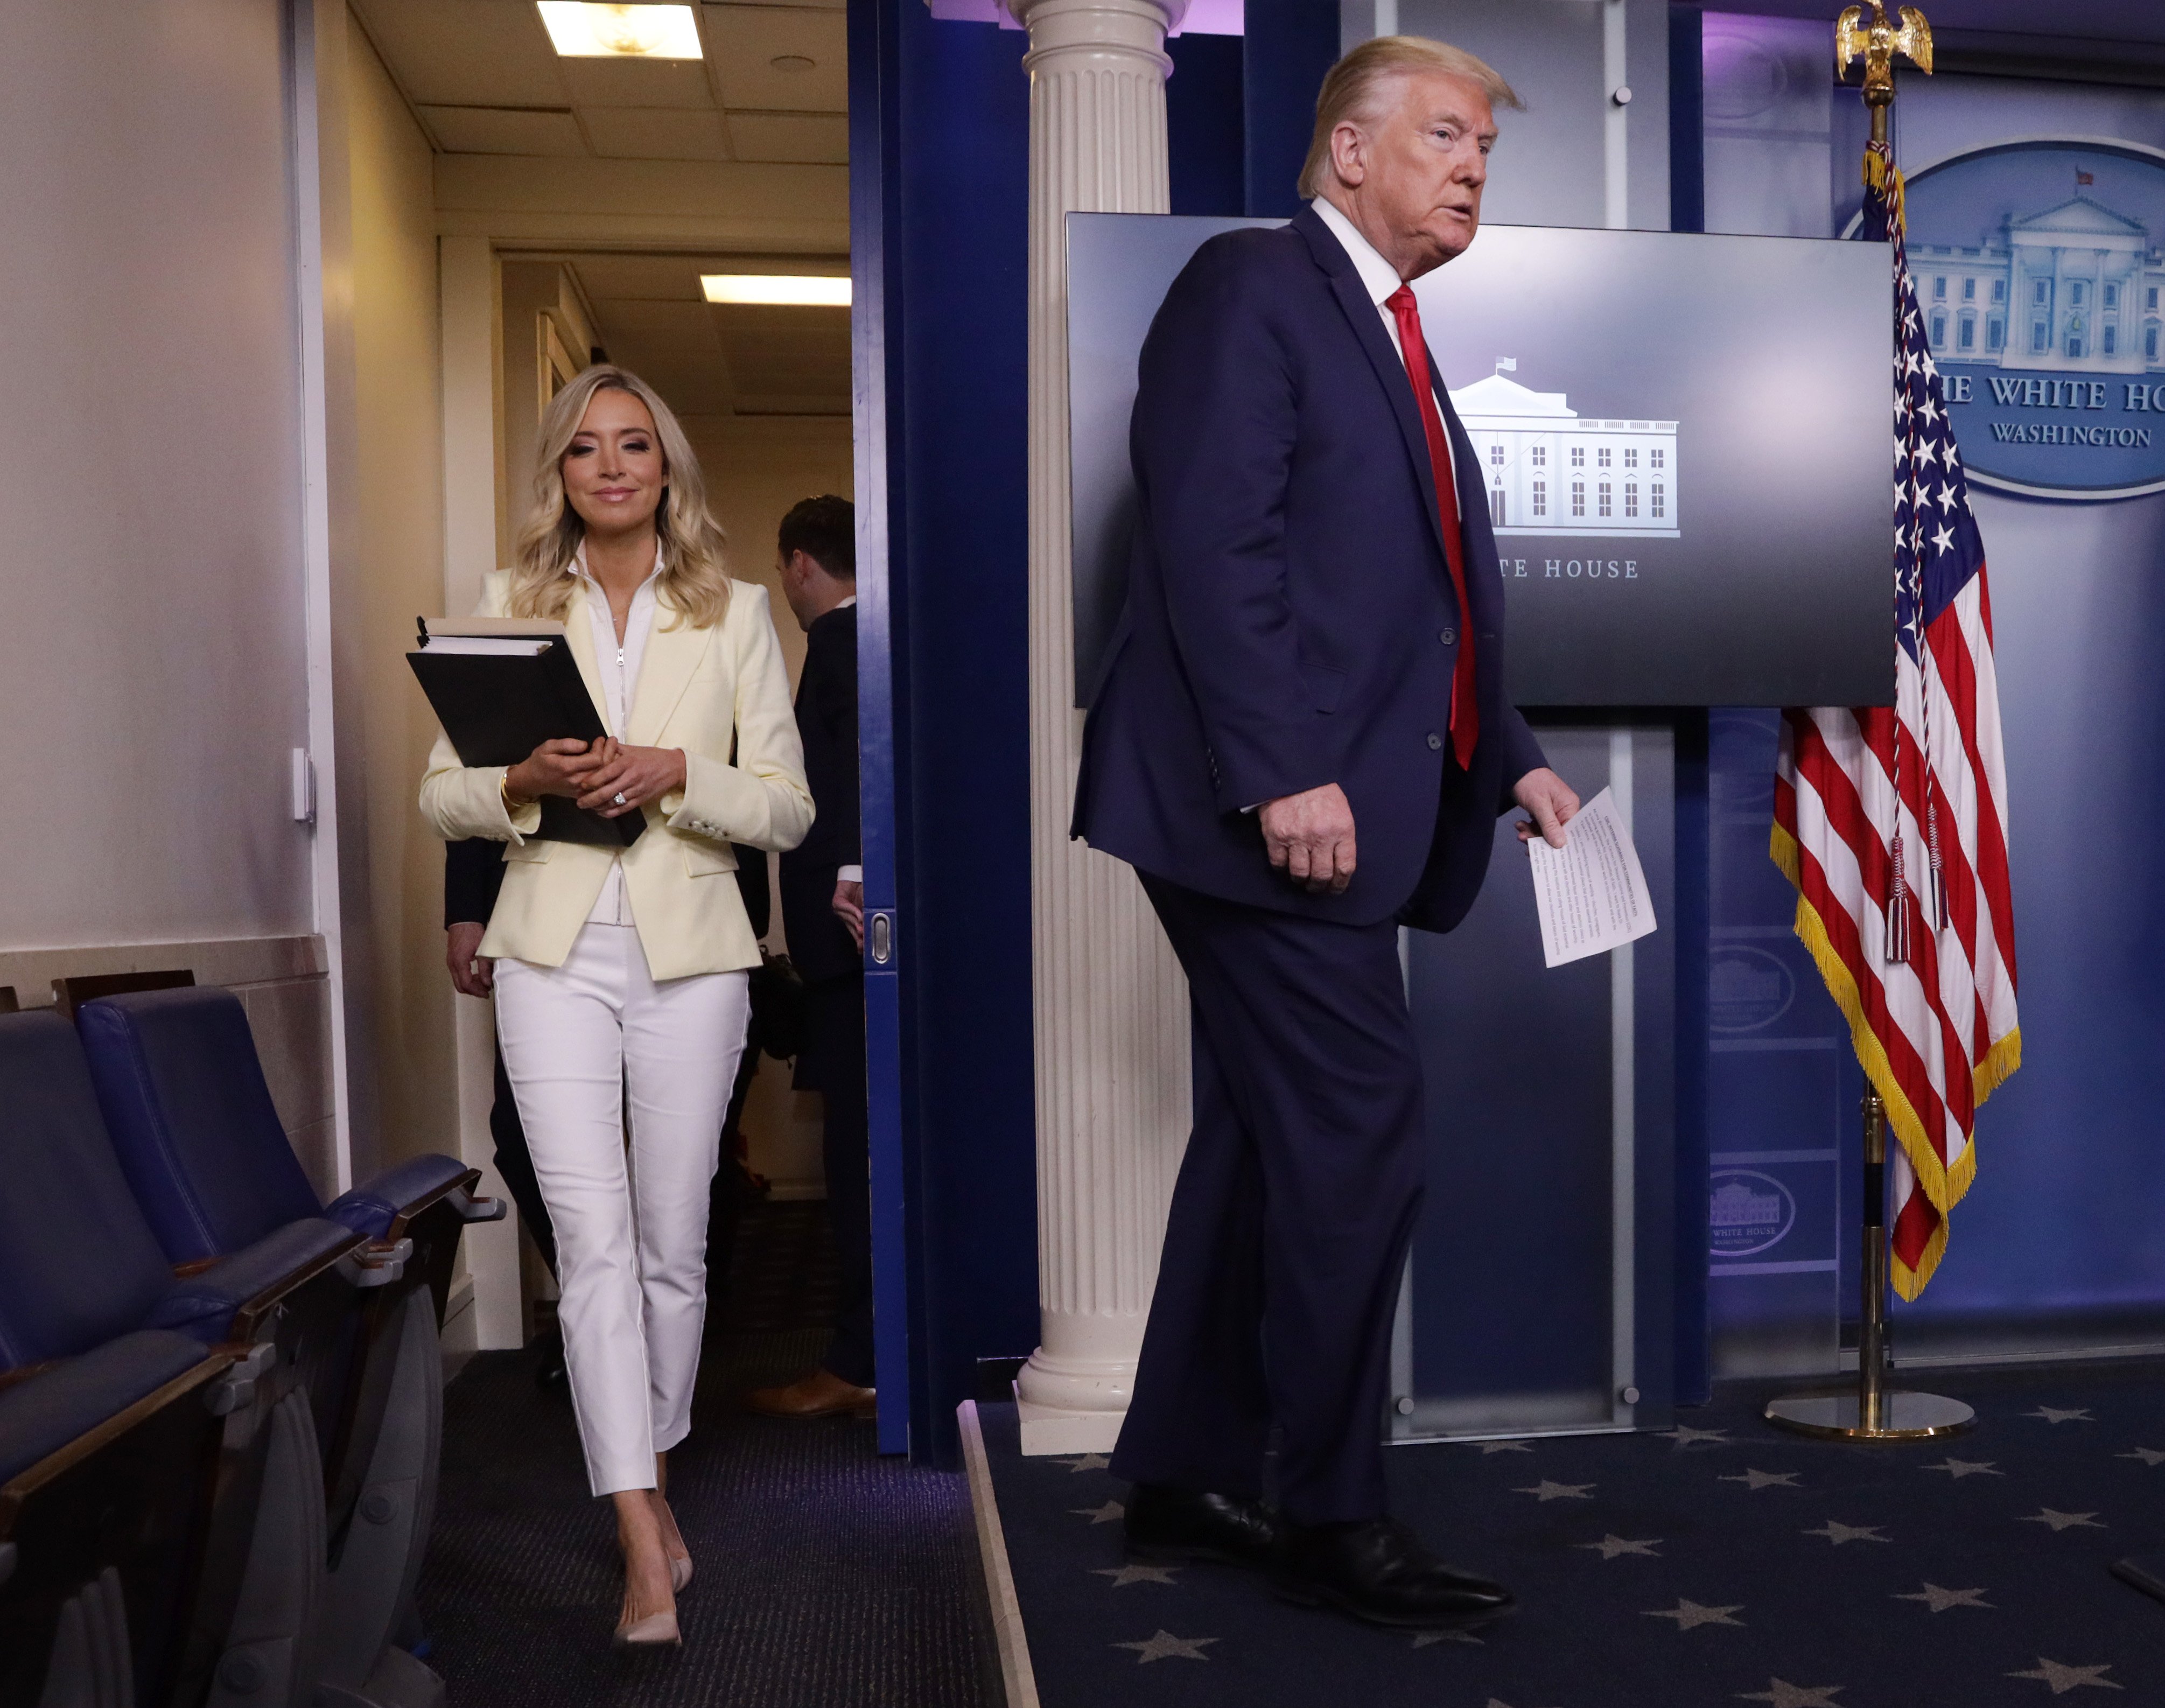 WASHINGTON, DC - MAY 22: U.S. President Donald Trump arrives with White House Press Secretary Kayleigh McEnany to make a statement in the briefing room at the White House on May 22, 2020 in Washington, DC. President Trump announced news CDC guidelines that churches and places of worship are essential and must reopen now. (Photo by Alex Wong/Getty Images)